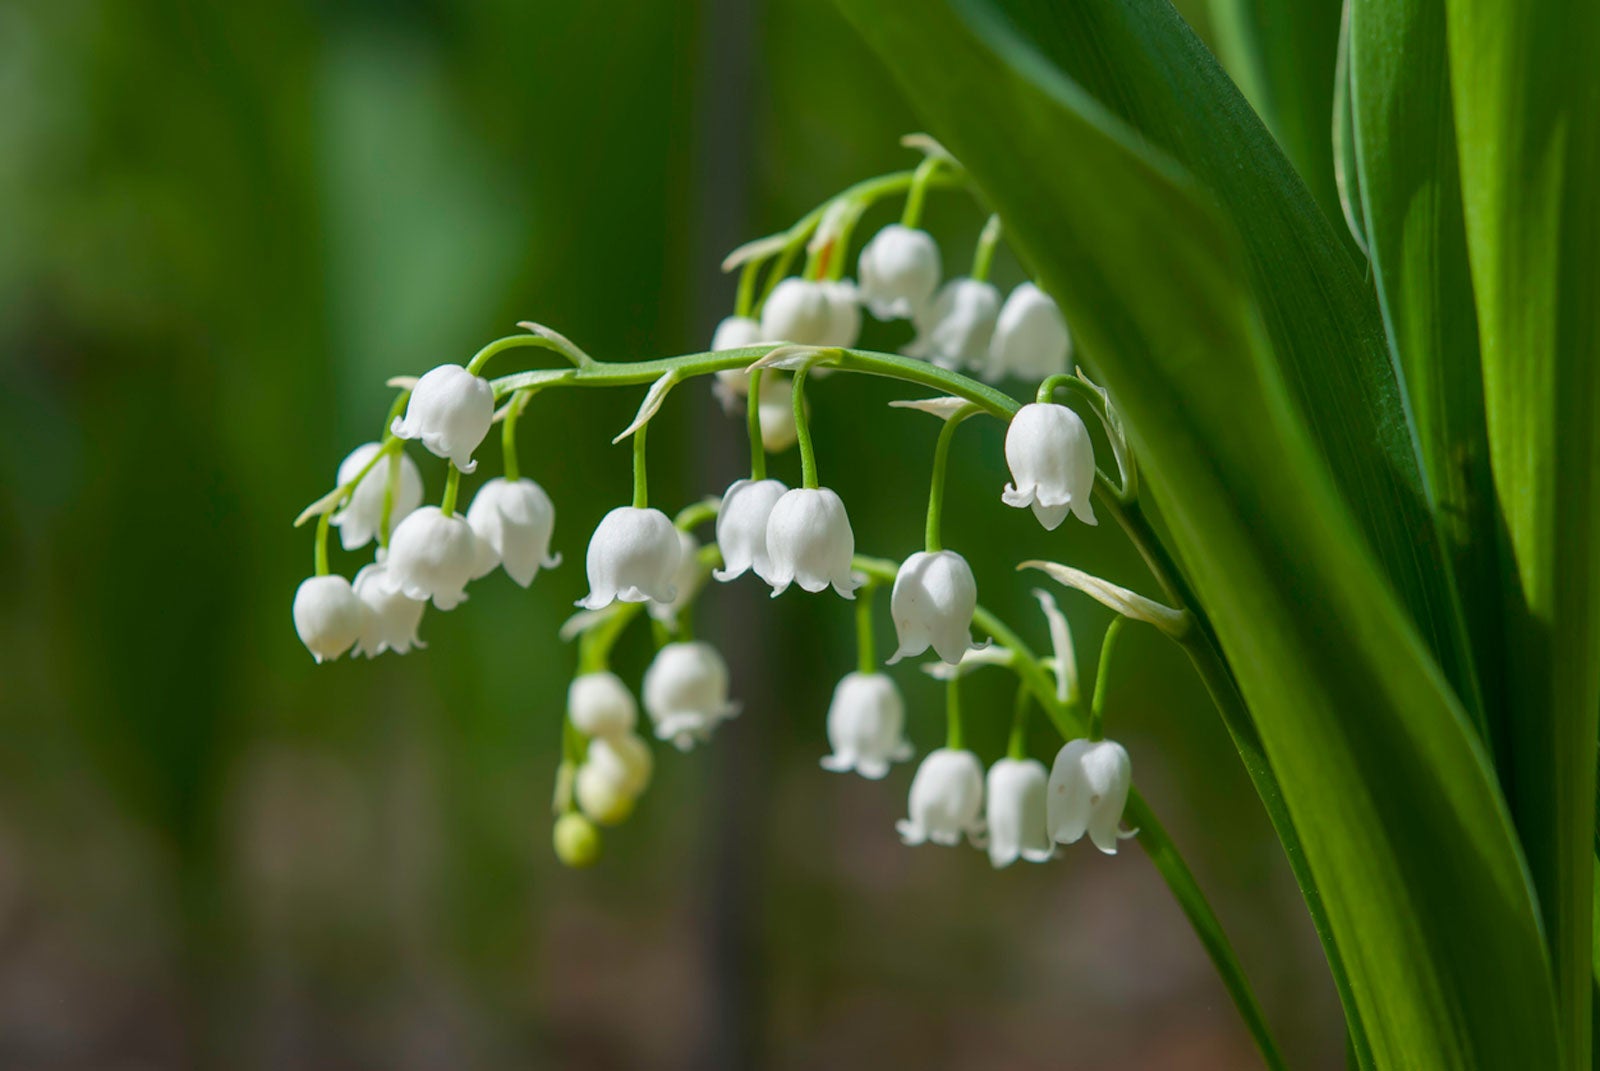 planting lily of the valley flowers - how to grow lily of the